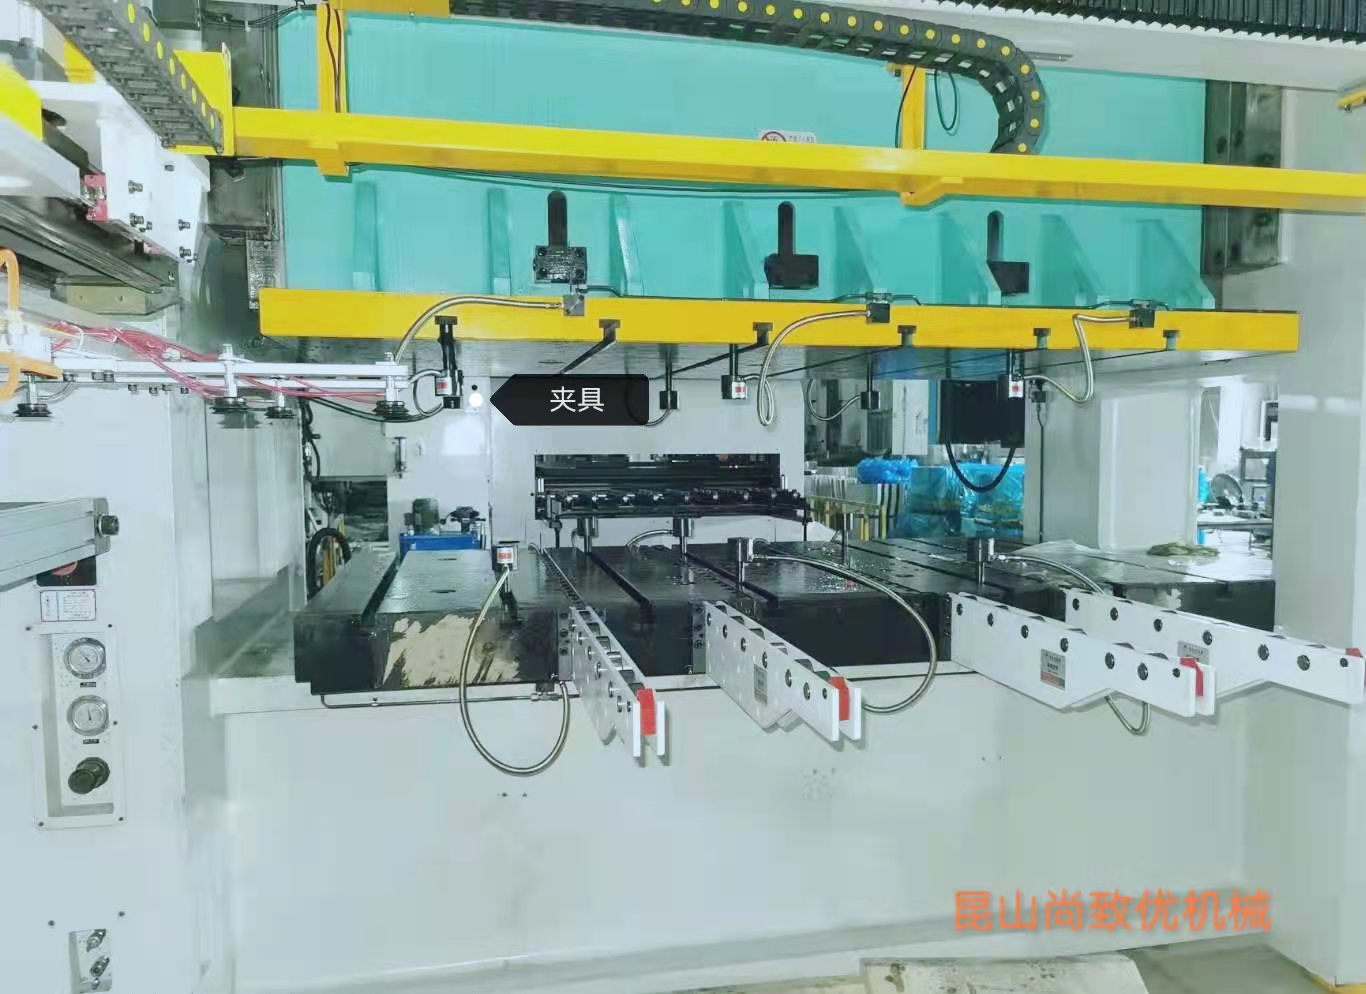 The advantages of fast mold changing in injection molding machines